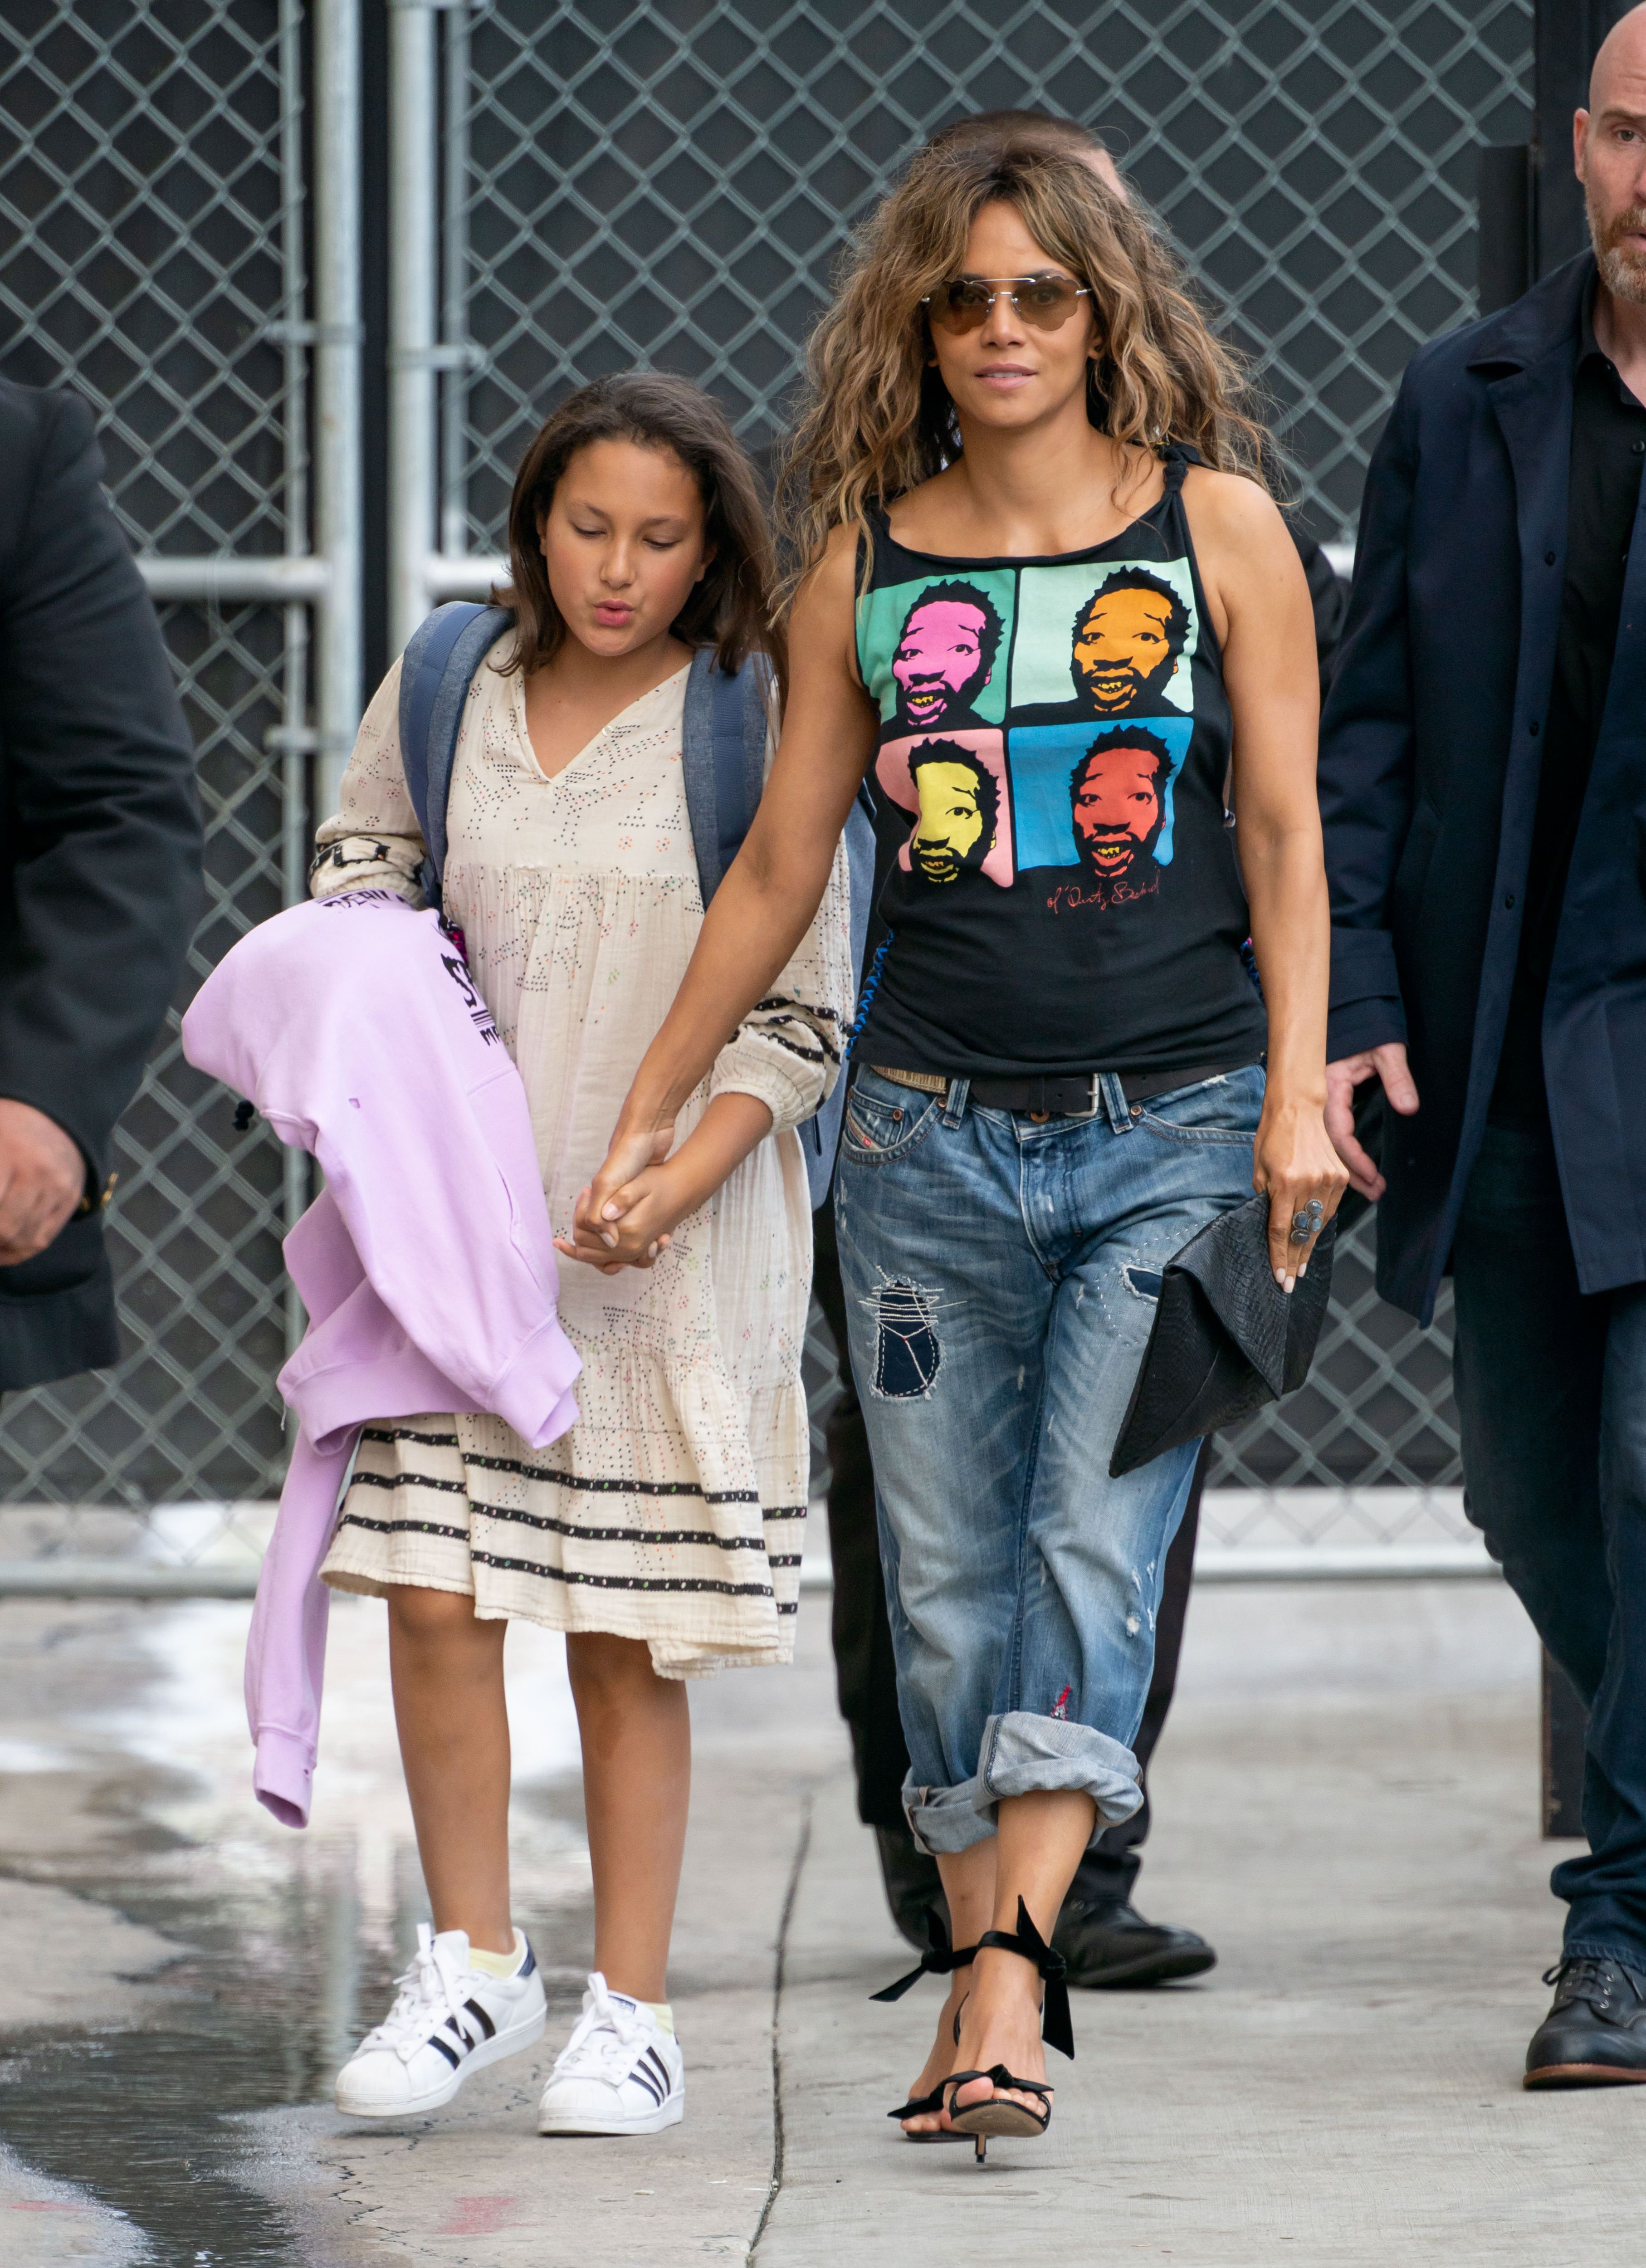 Halle Berry's 2 Kids Get to Know Daughter Nahla and Son Maceo